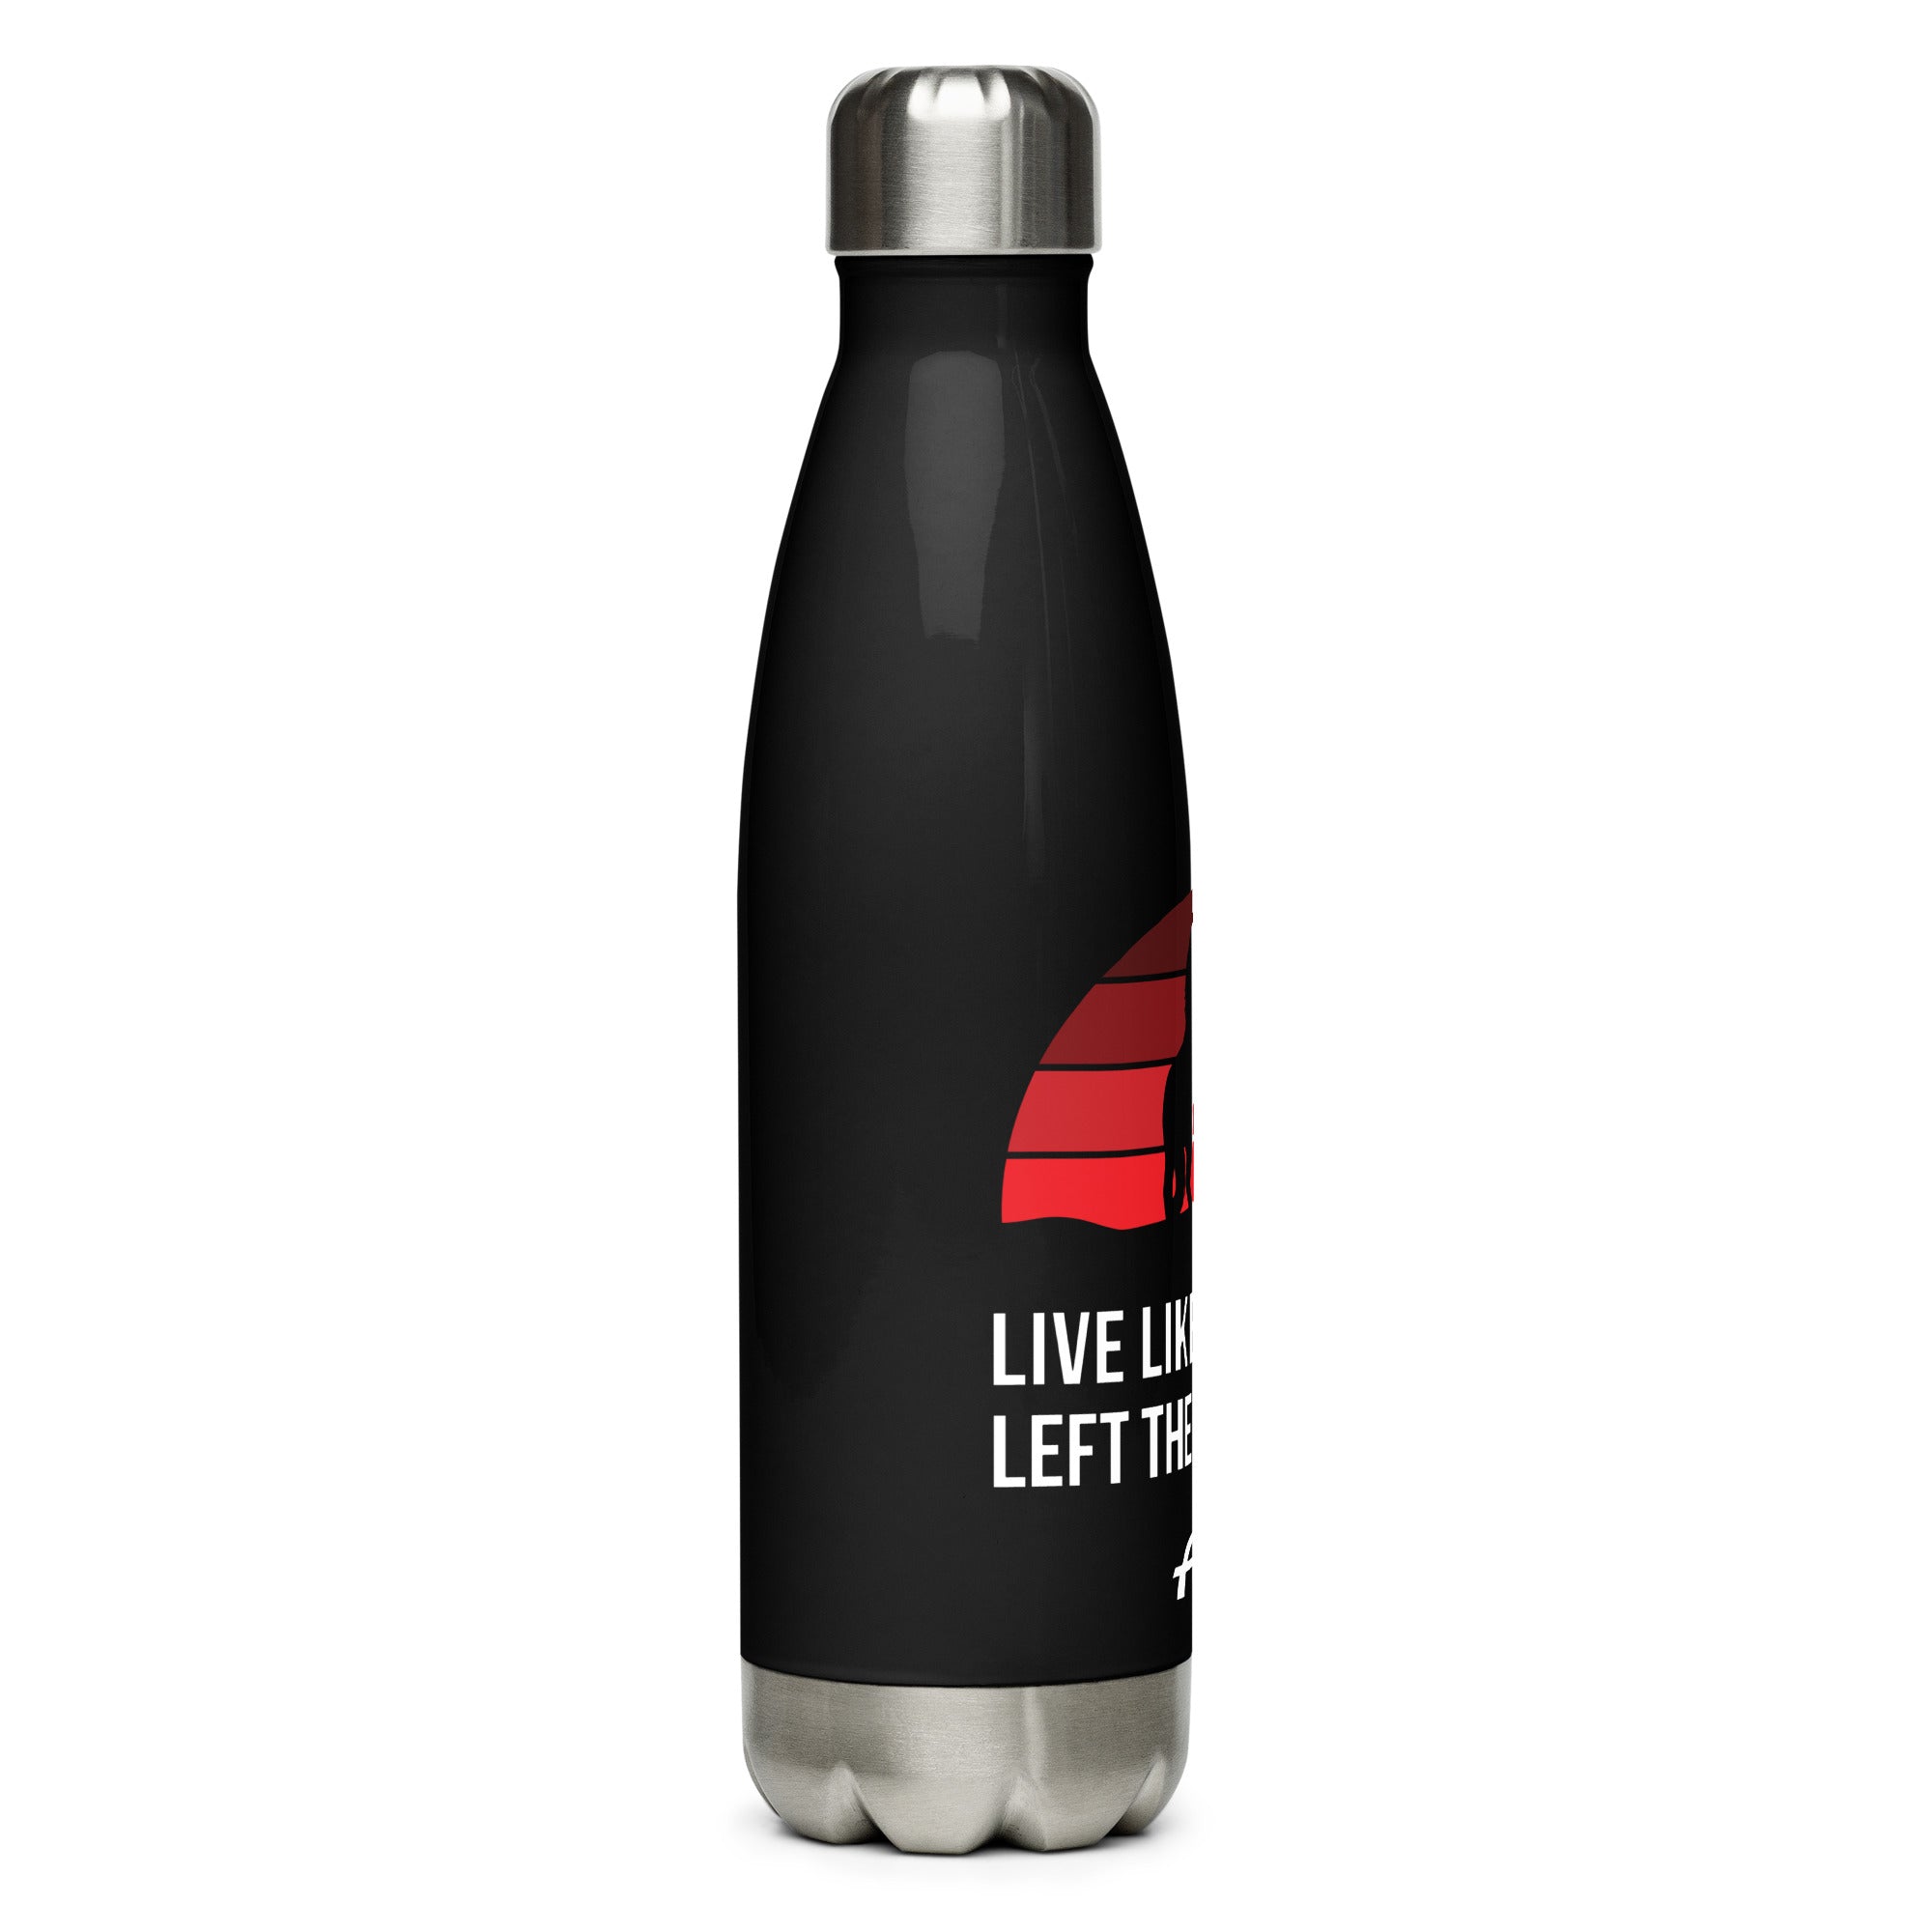 Live like Someone Stainless Steel Water Bottle FEI Official Store